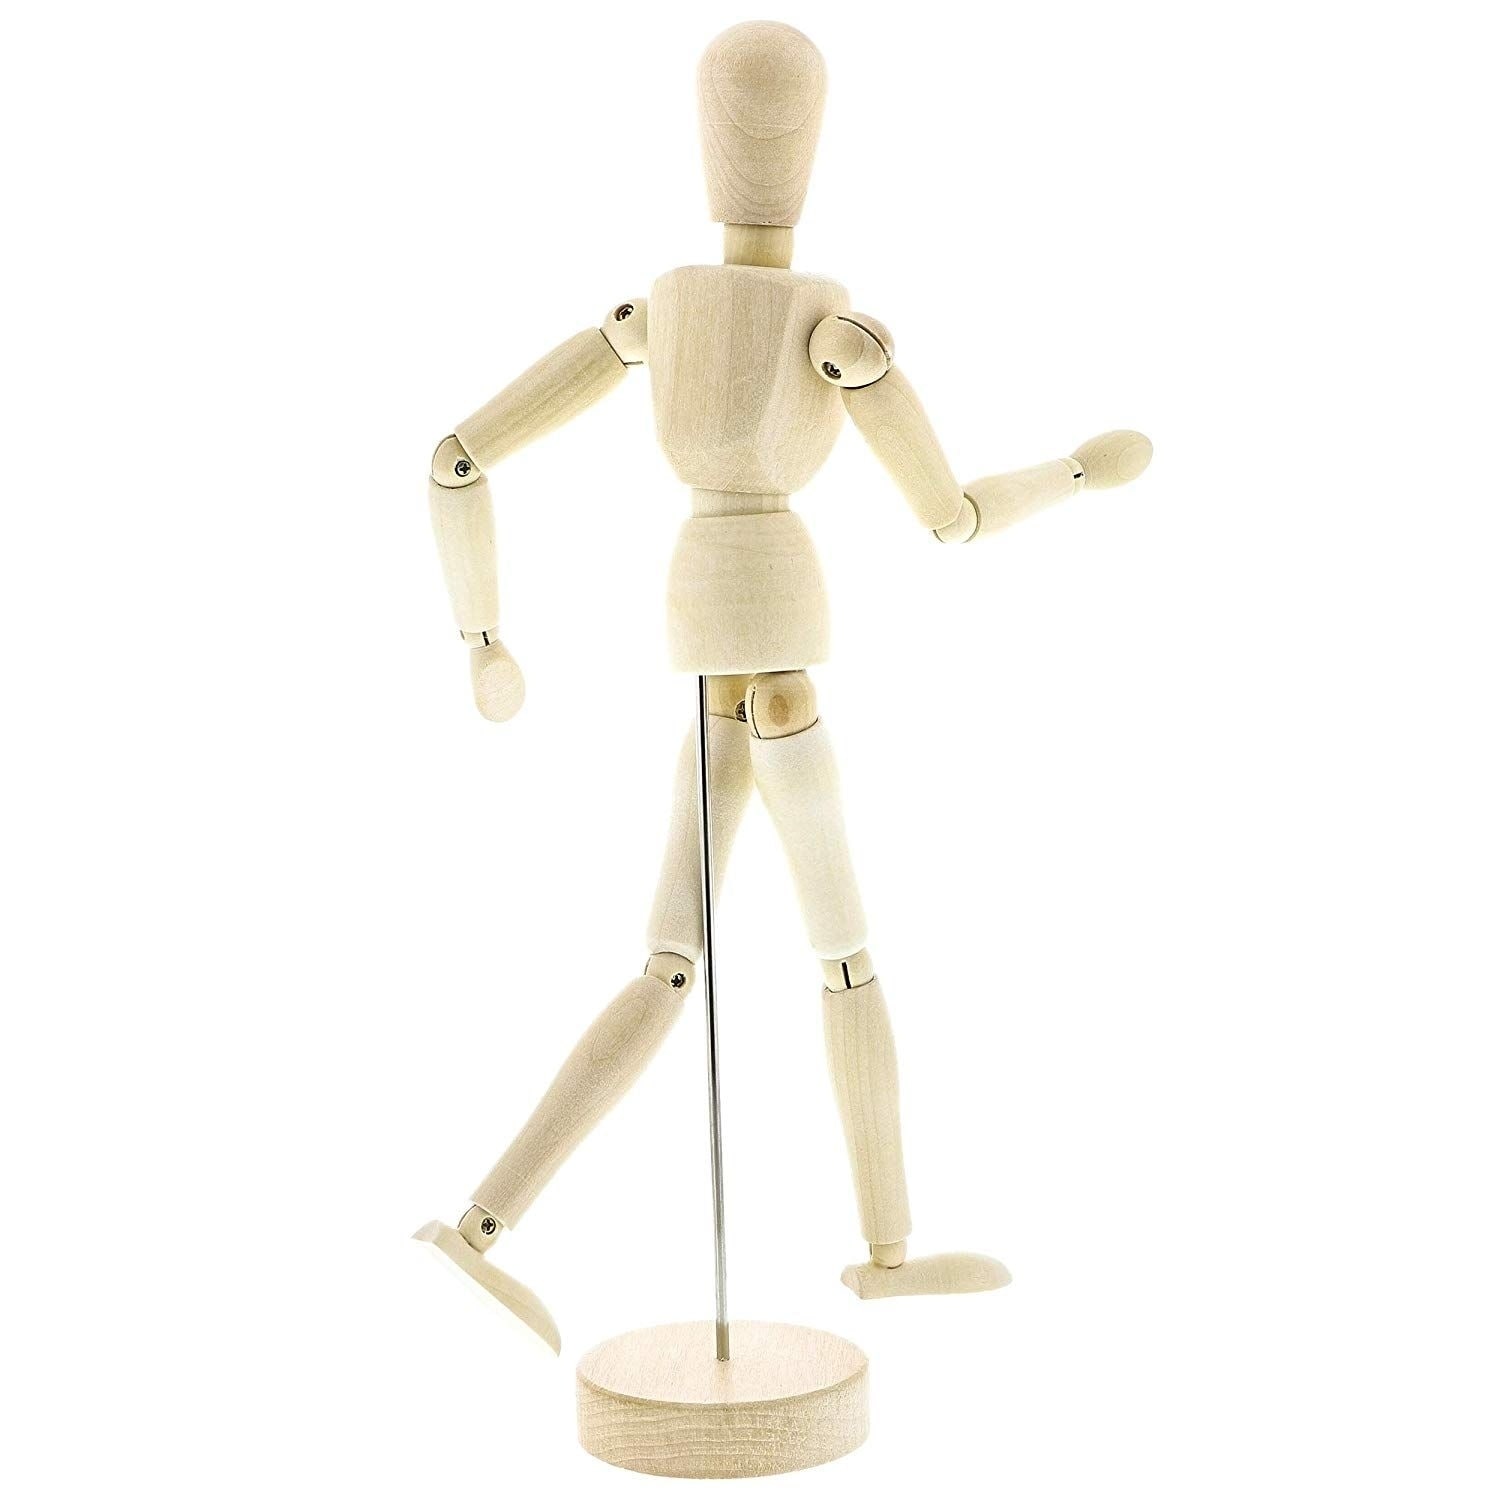 Articulated Wooden Mannequin Figure, Adjustable Limbs, Sketching Model,  Home Decoration